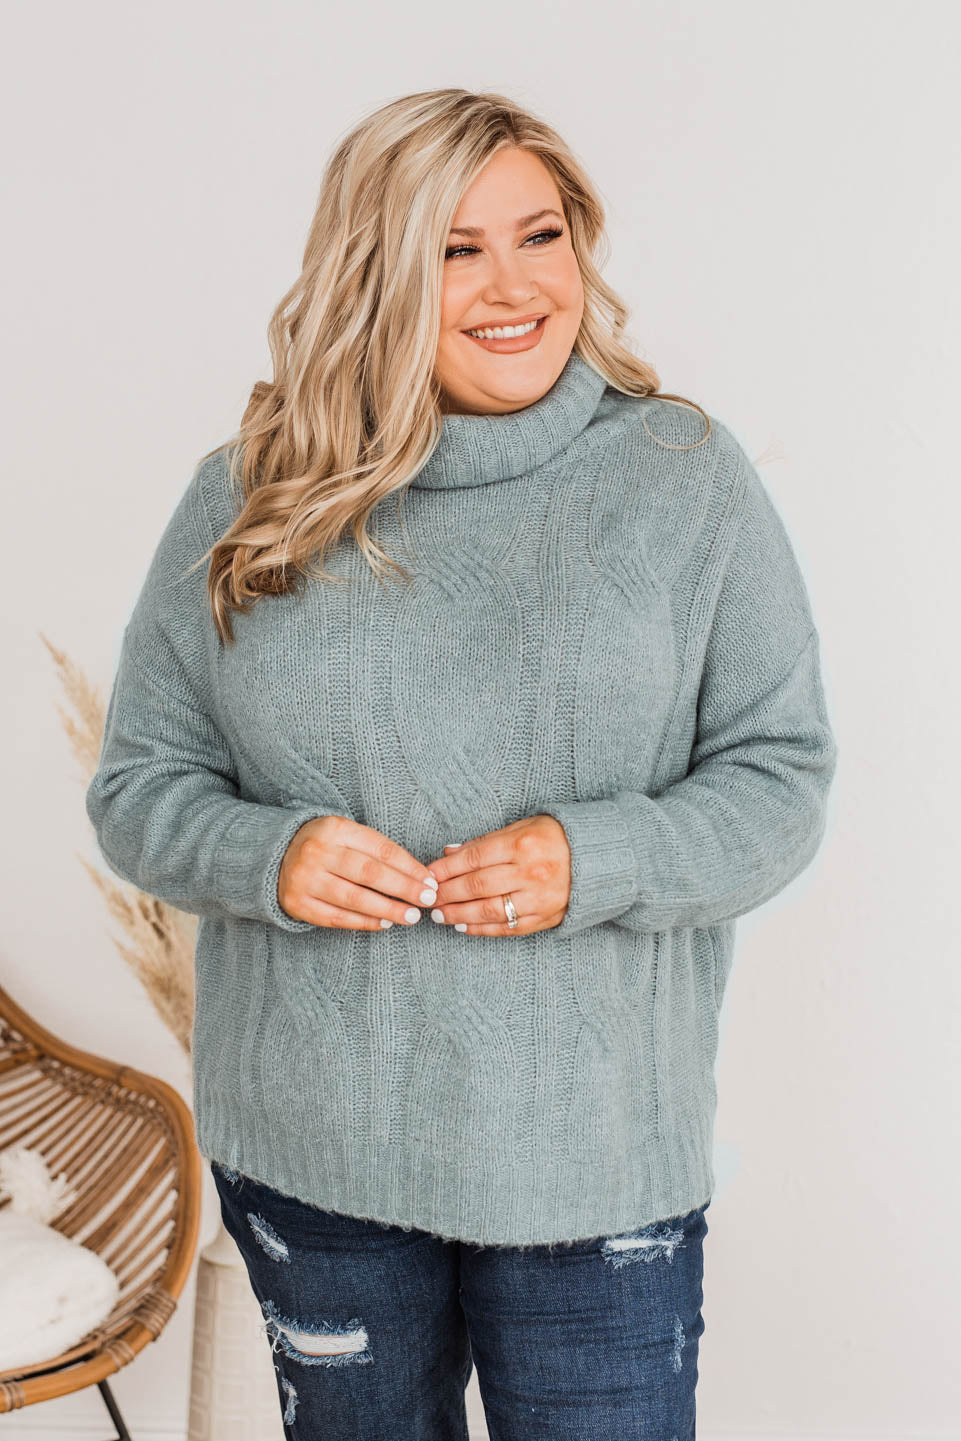 Greatest Blessings Knit Cowl Neck Sweater- Teal